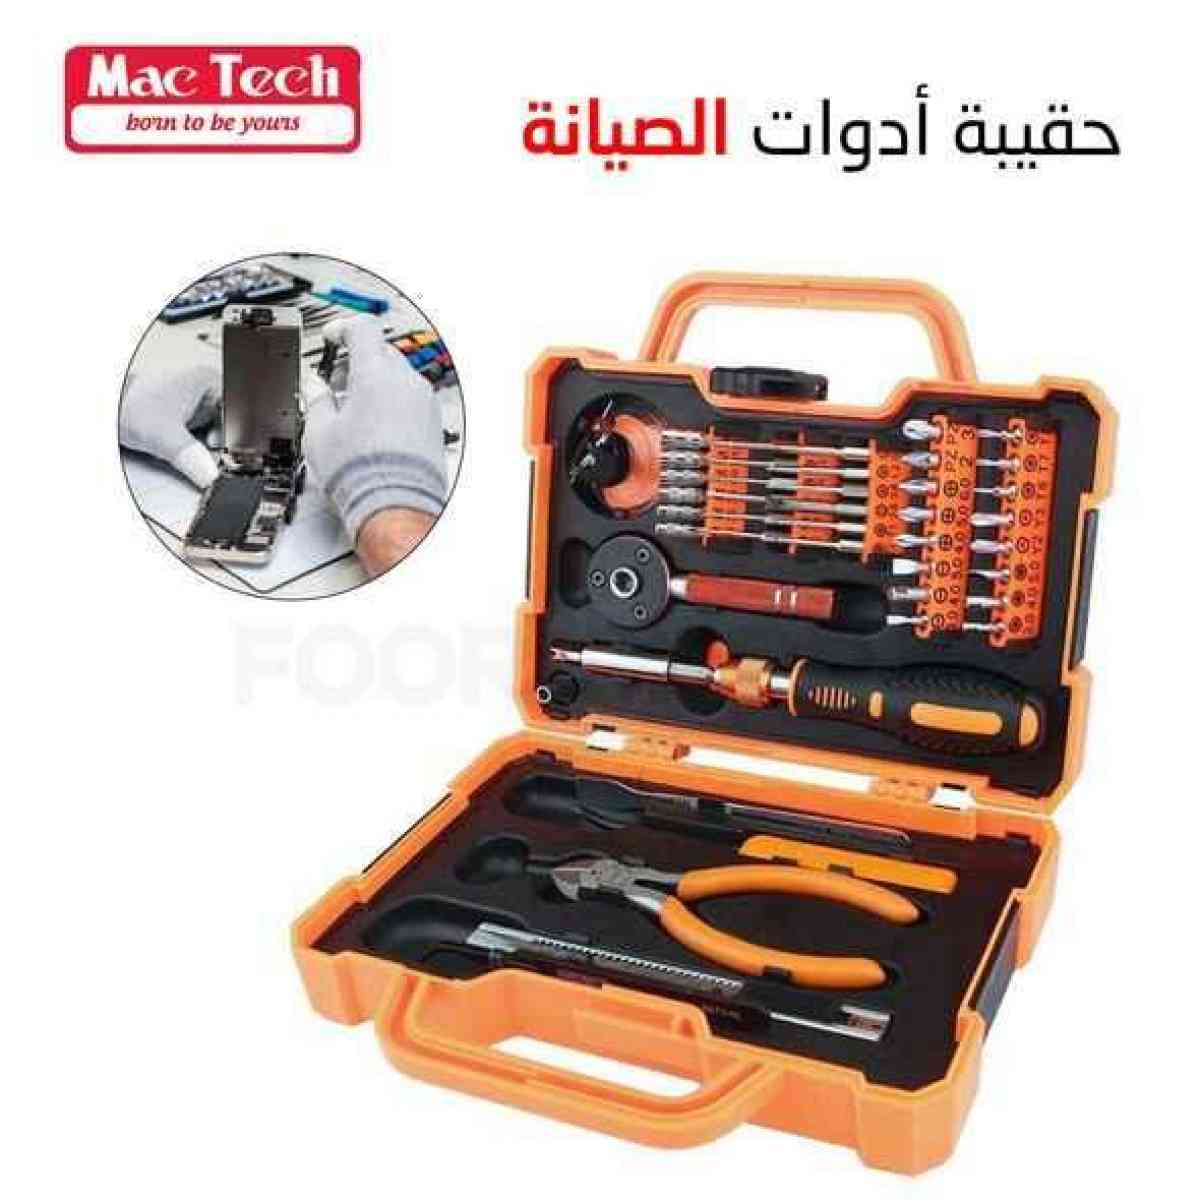 Malette a outils mac tech 47 in 1